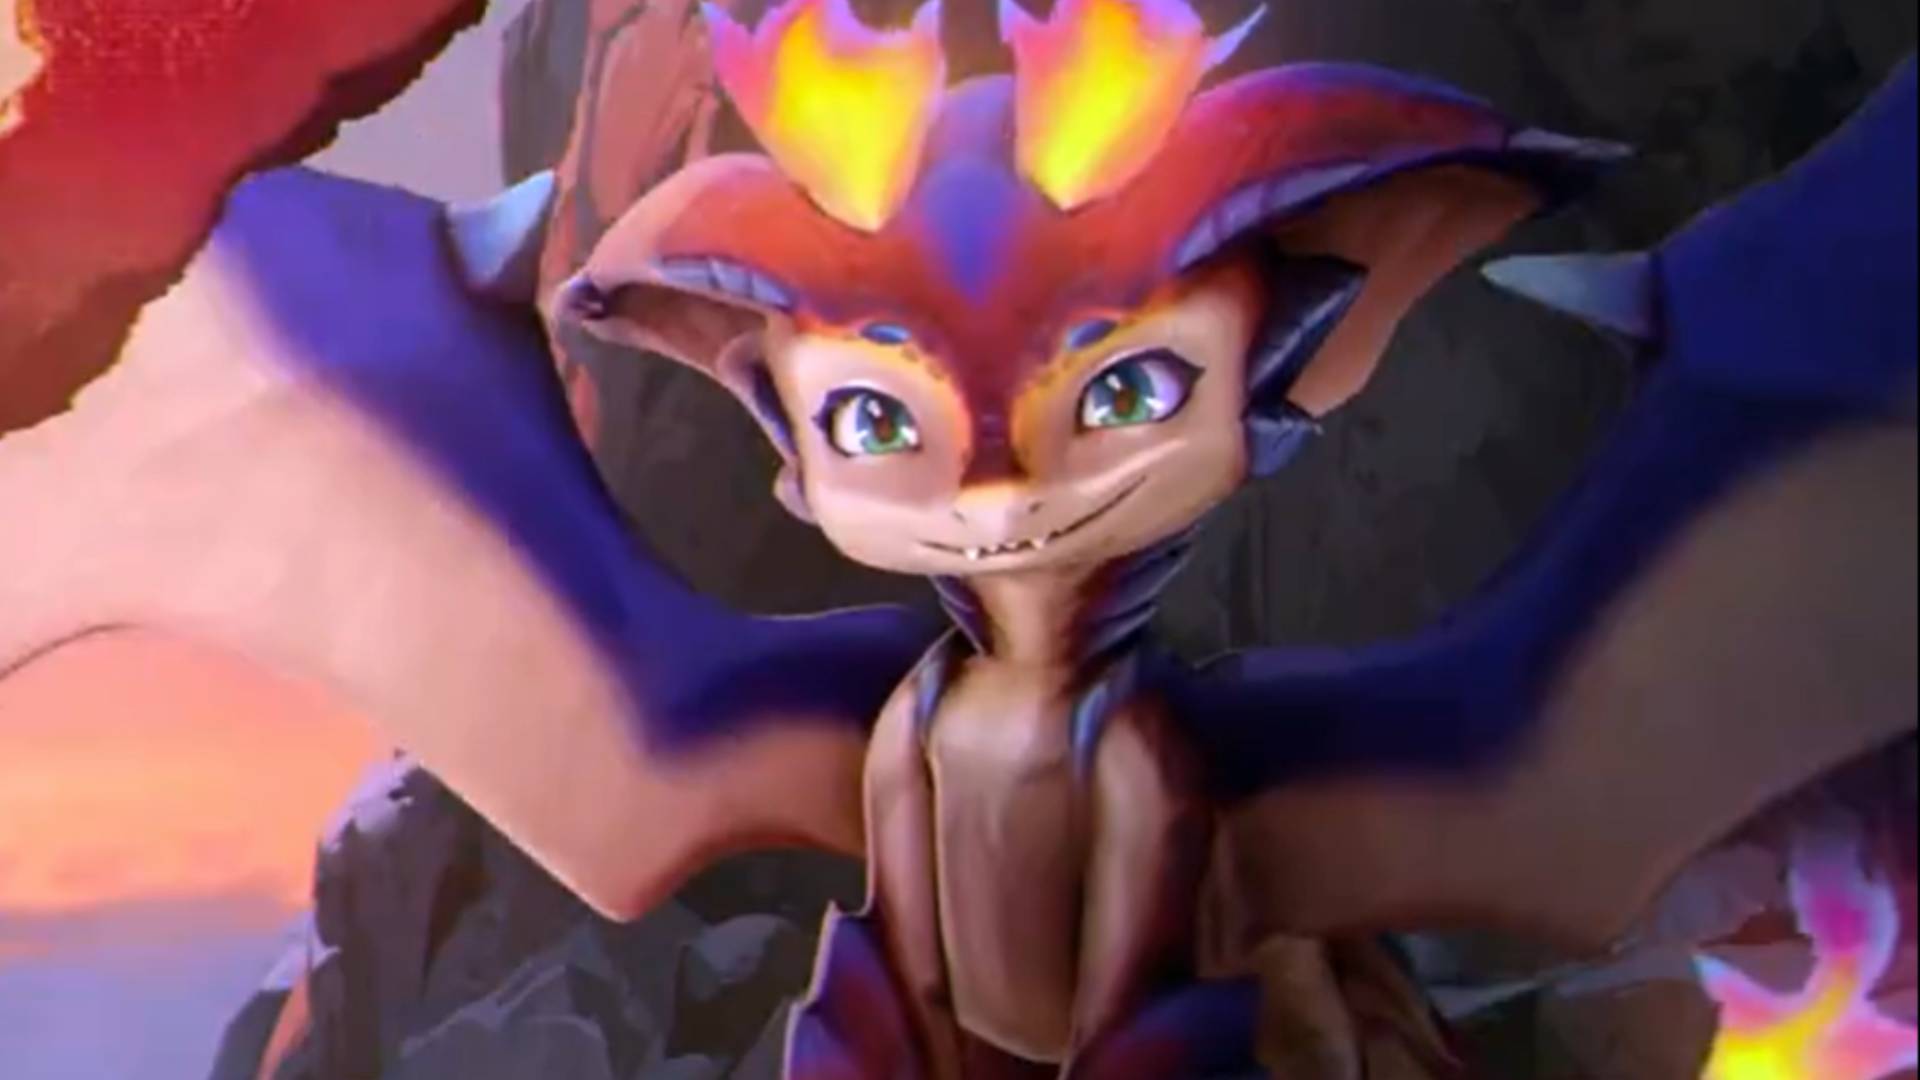 Riot just dropped a new League of Legends champion, and he's adorable